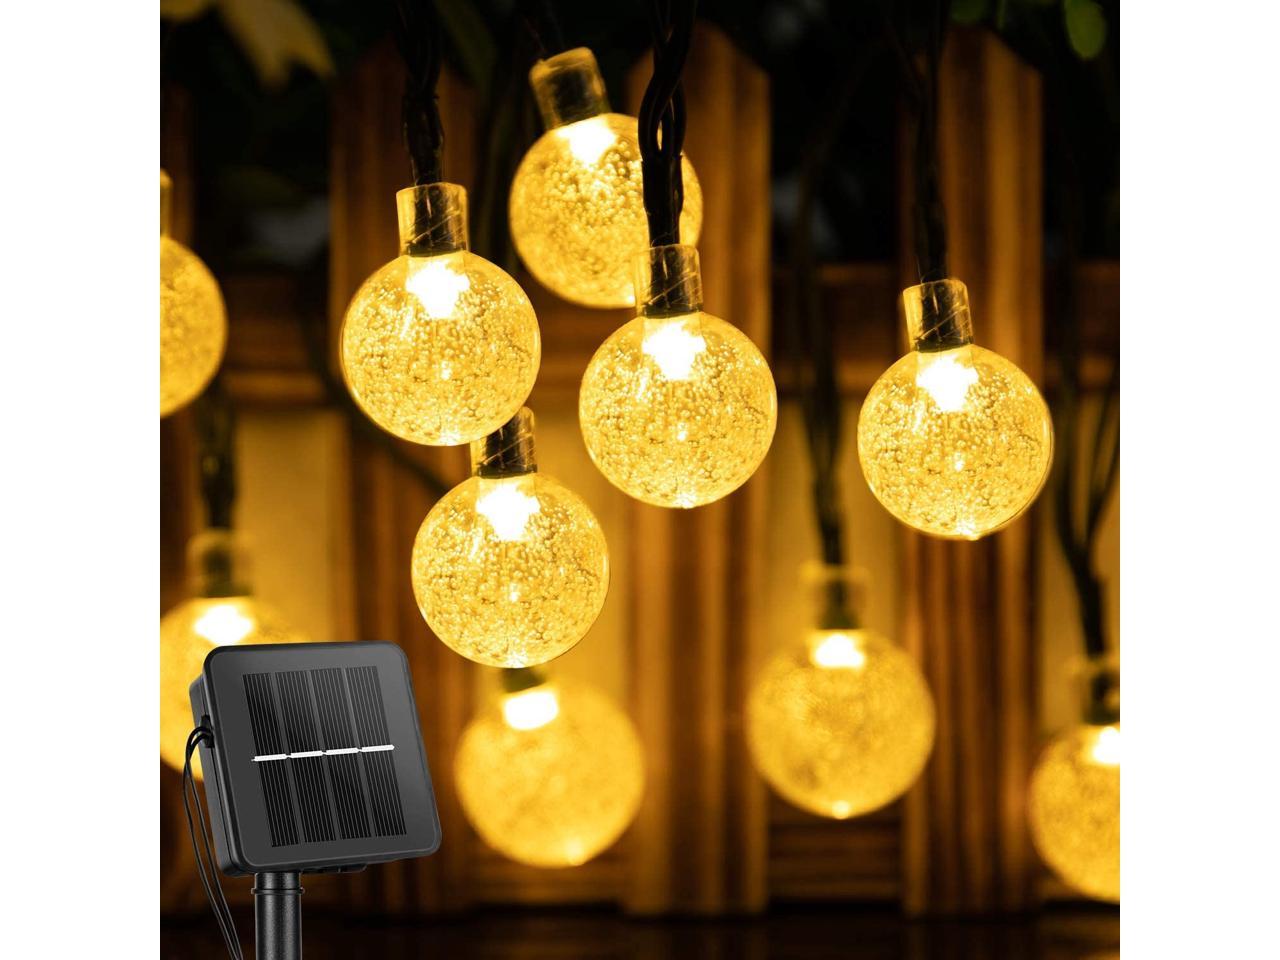 Waterproof Solar Powered Patio Lights for Garden Yard Porch Wedding Party Decor Warm White Solar String Lights Outdoor 60 Led 35.6 Feet Crystal Globe Lights with 8 Lighting Modes 